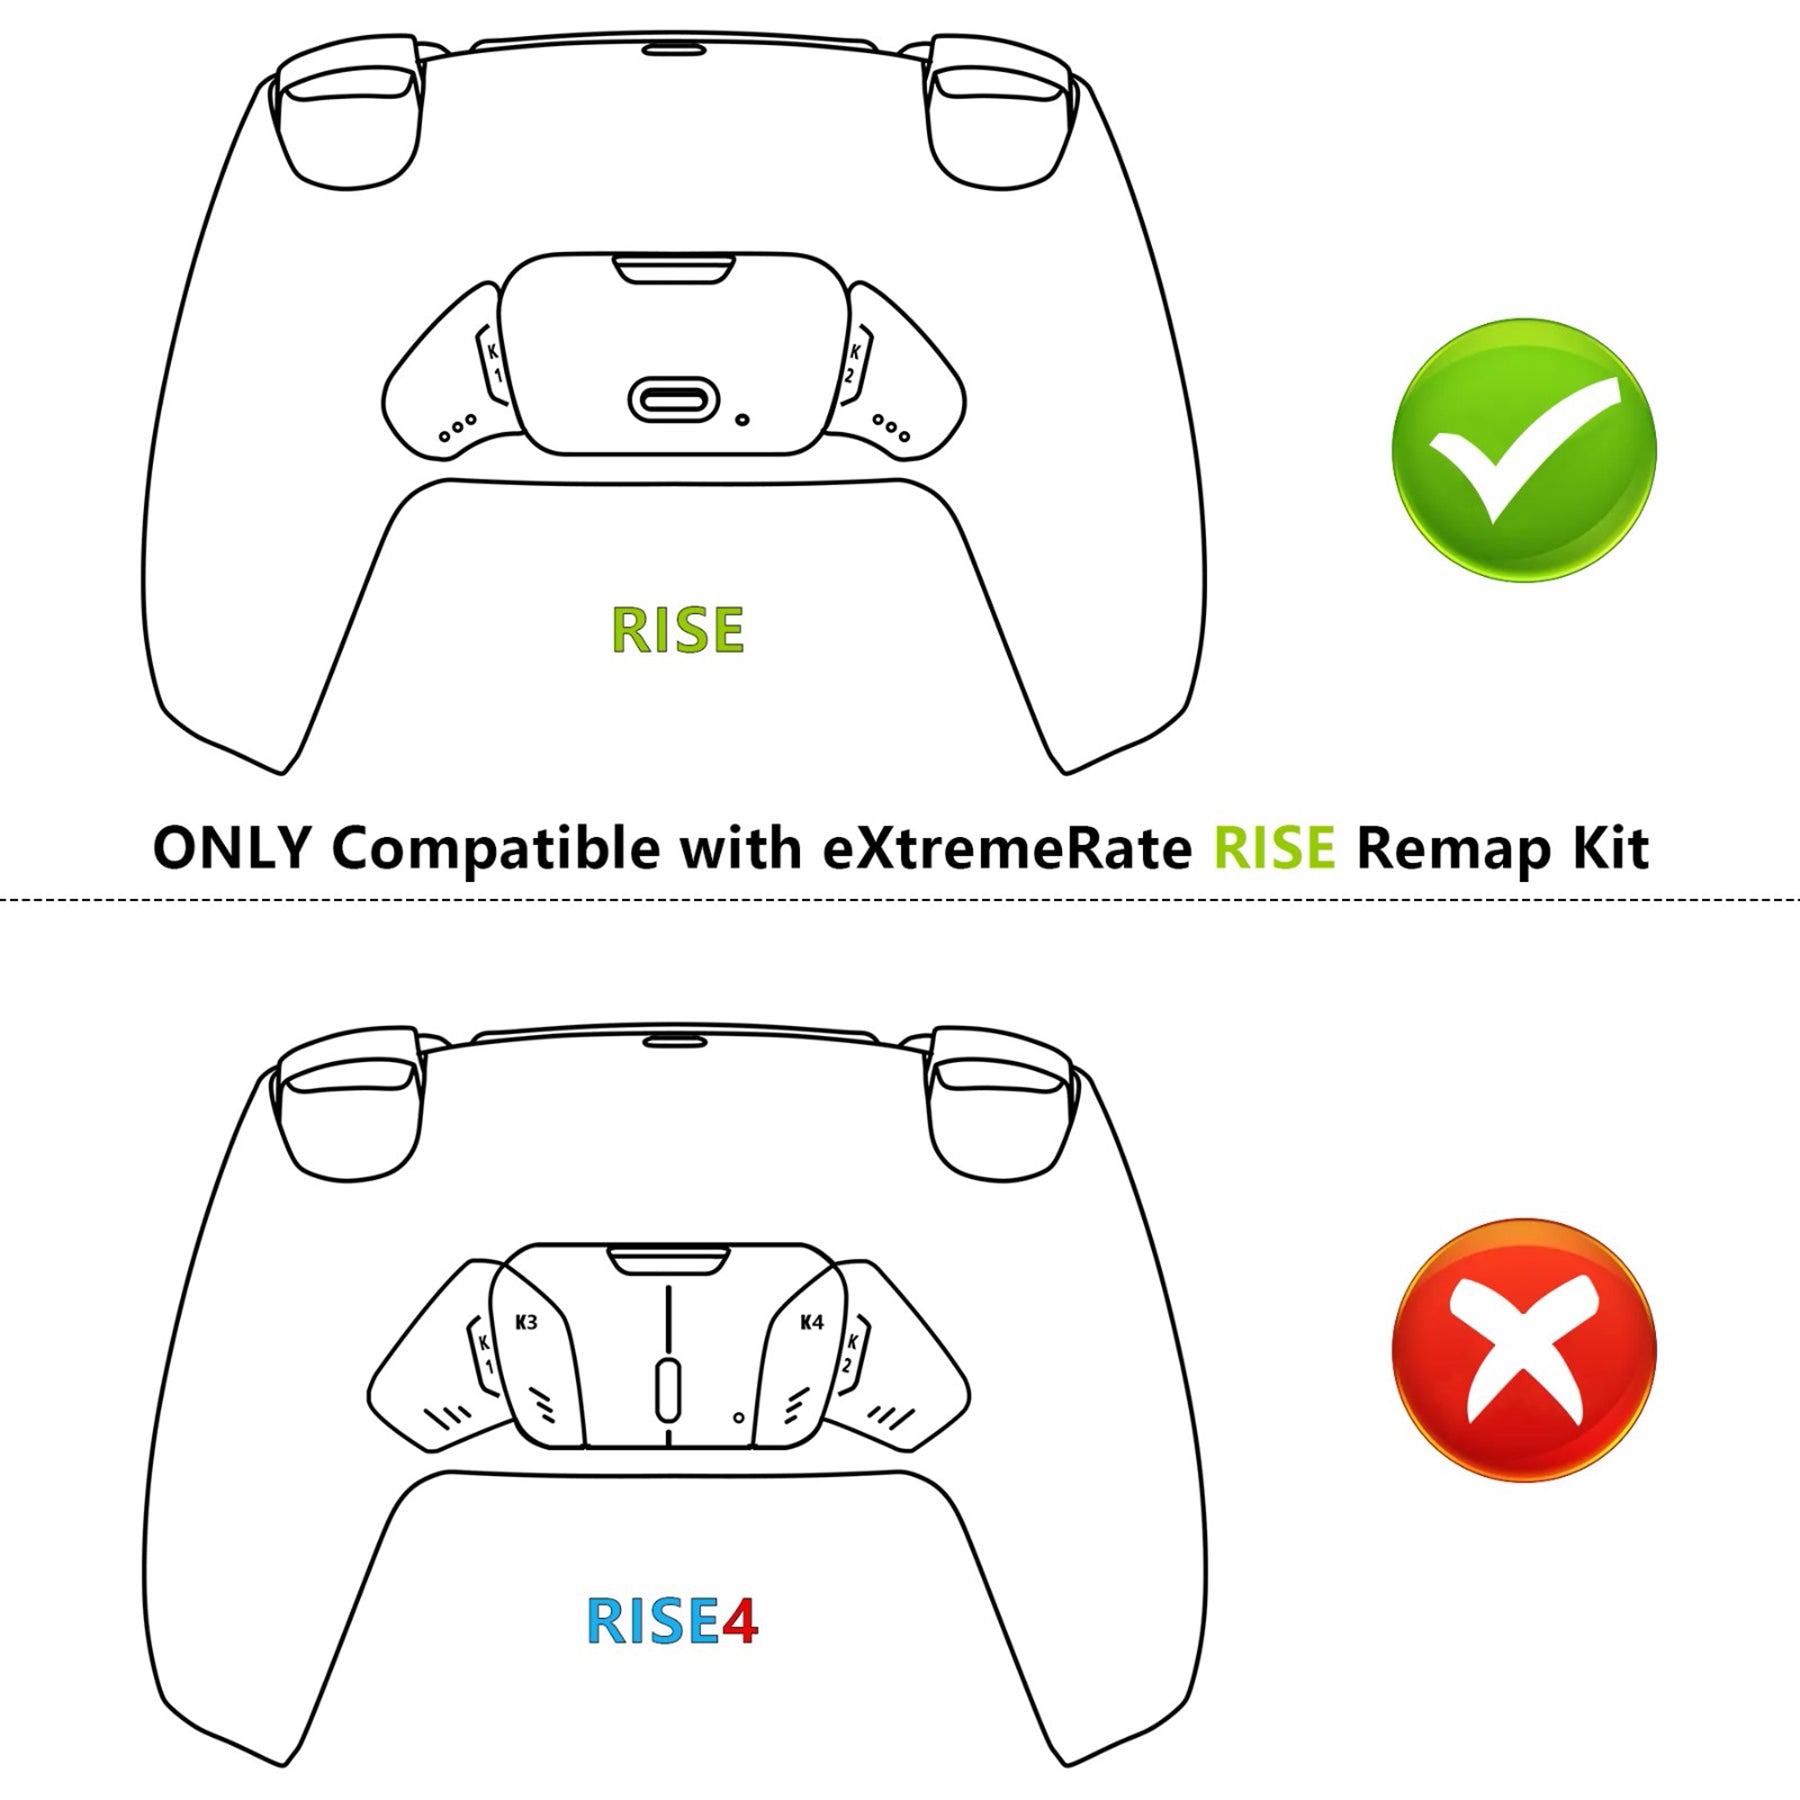 eXtremeRate Replacement Redesigned K1 K2 Back Buttons for eXtremerate RISE Remap Kit, Compatible with PS5 Controller - White eXtremeRate